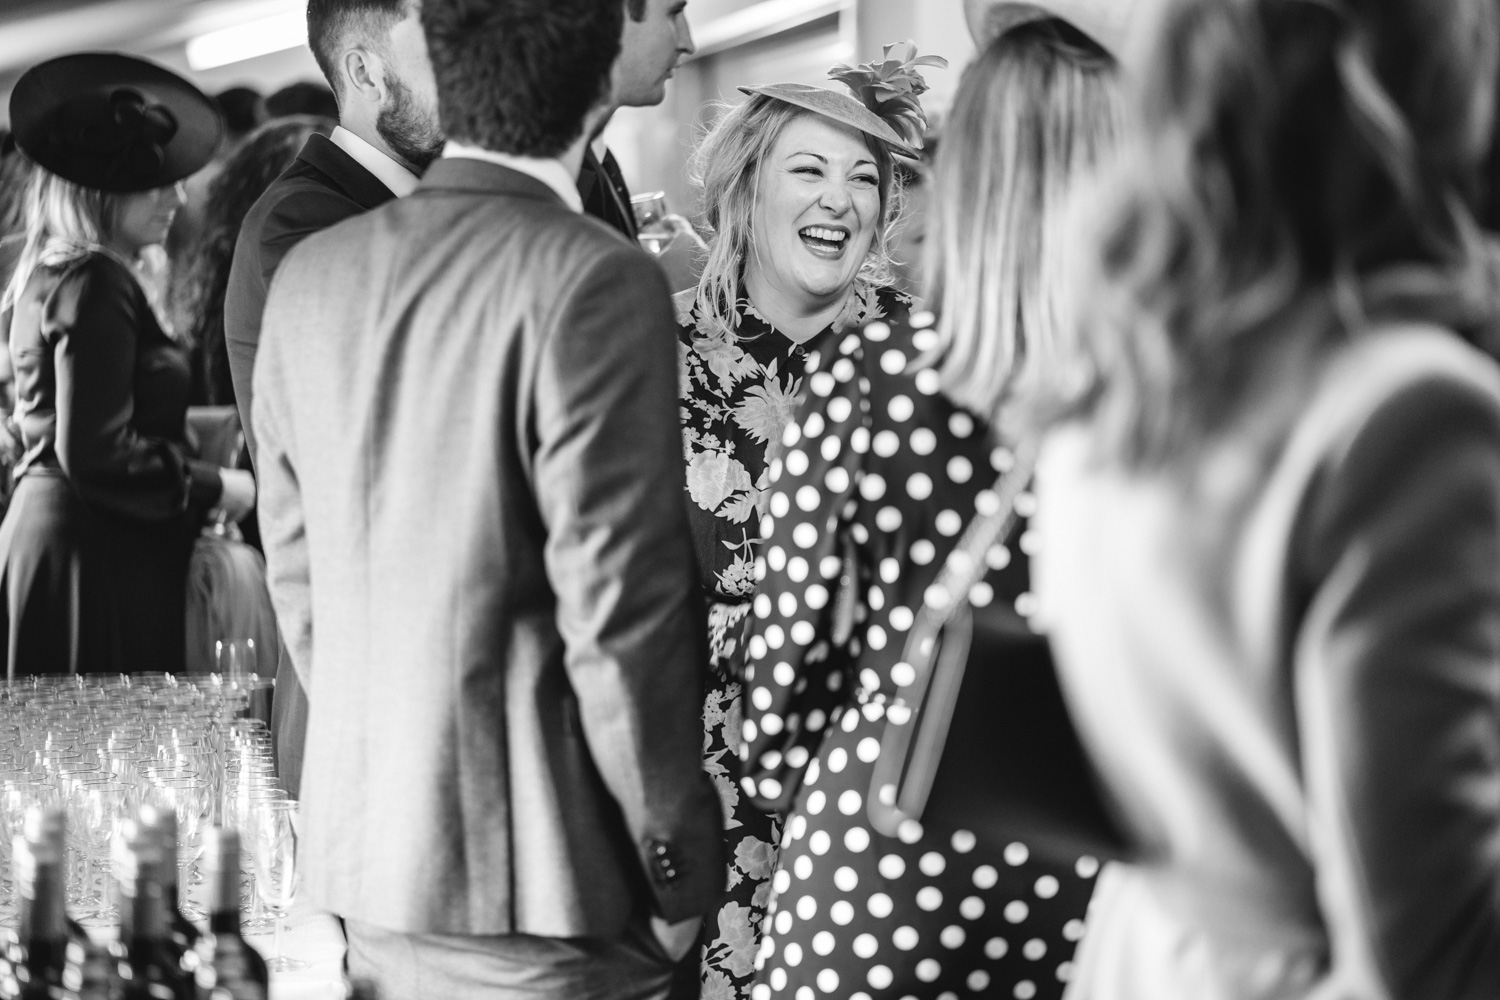 A laughing wedding guest